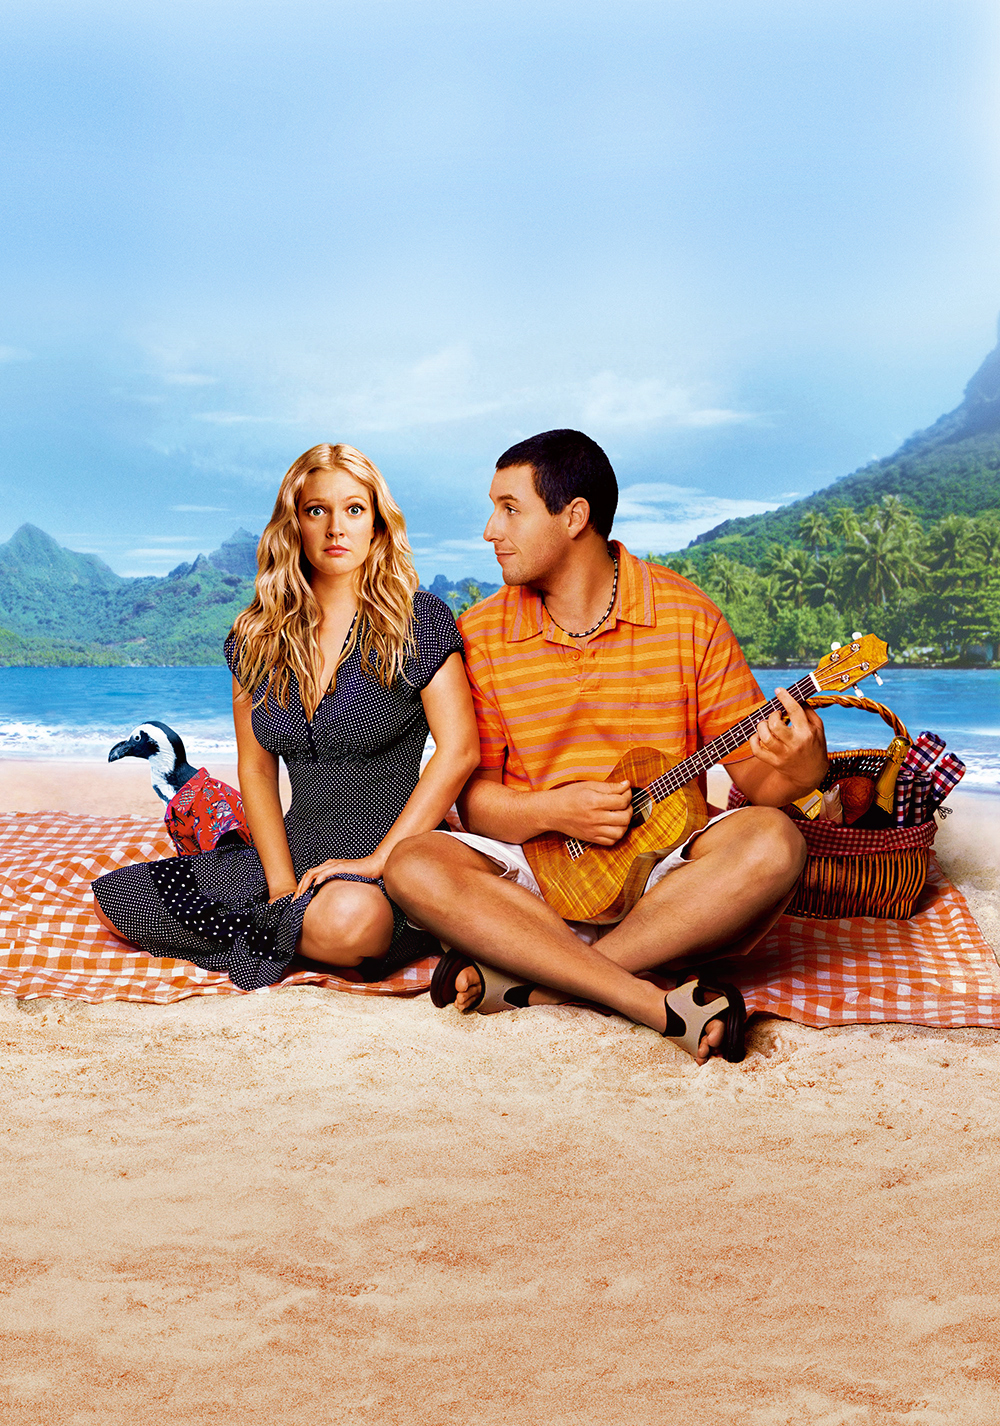 50 First Dates Images. 